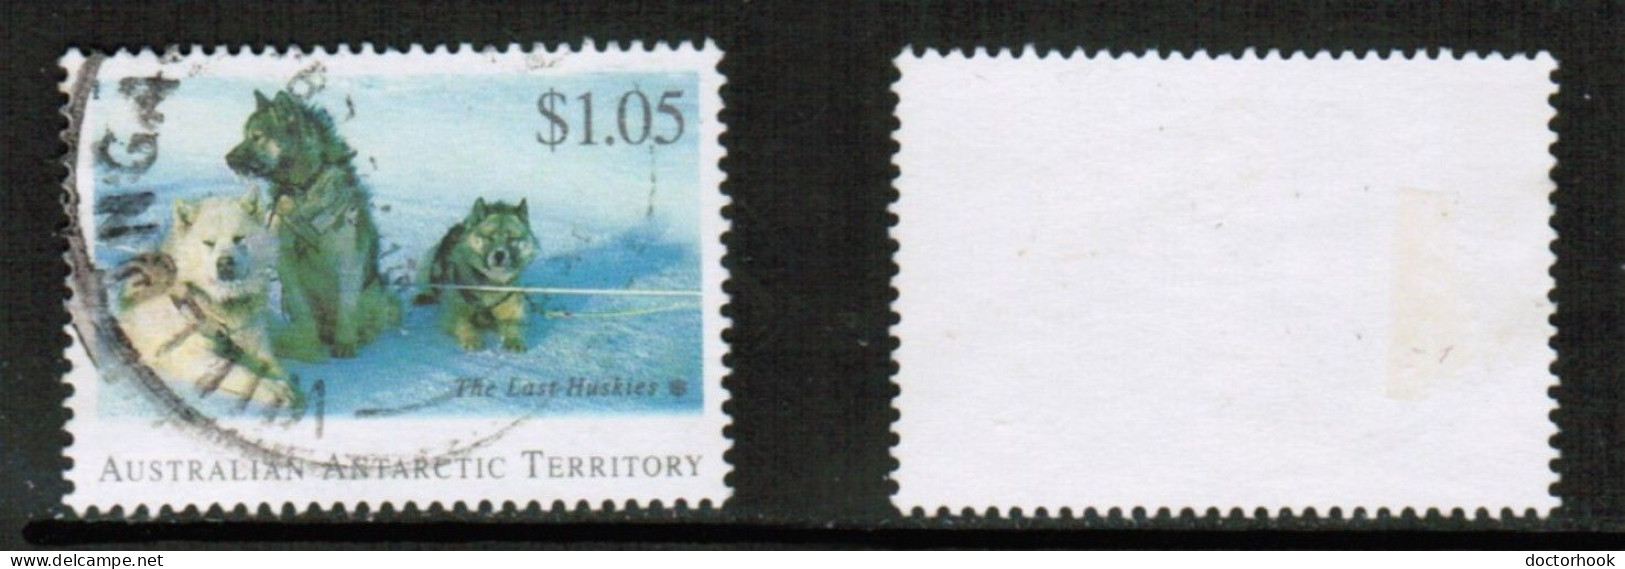 AUSTRALIAN ANTARCTIC TERRITORY   Scott # L 93 USED (CONDITION AS PER SCAN) (Stamp Scan # 929-3) - Usados